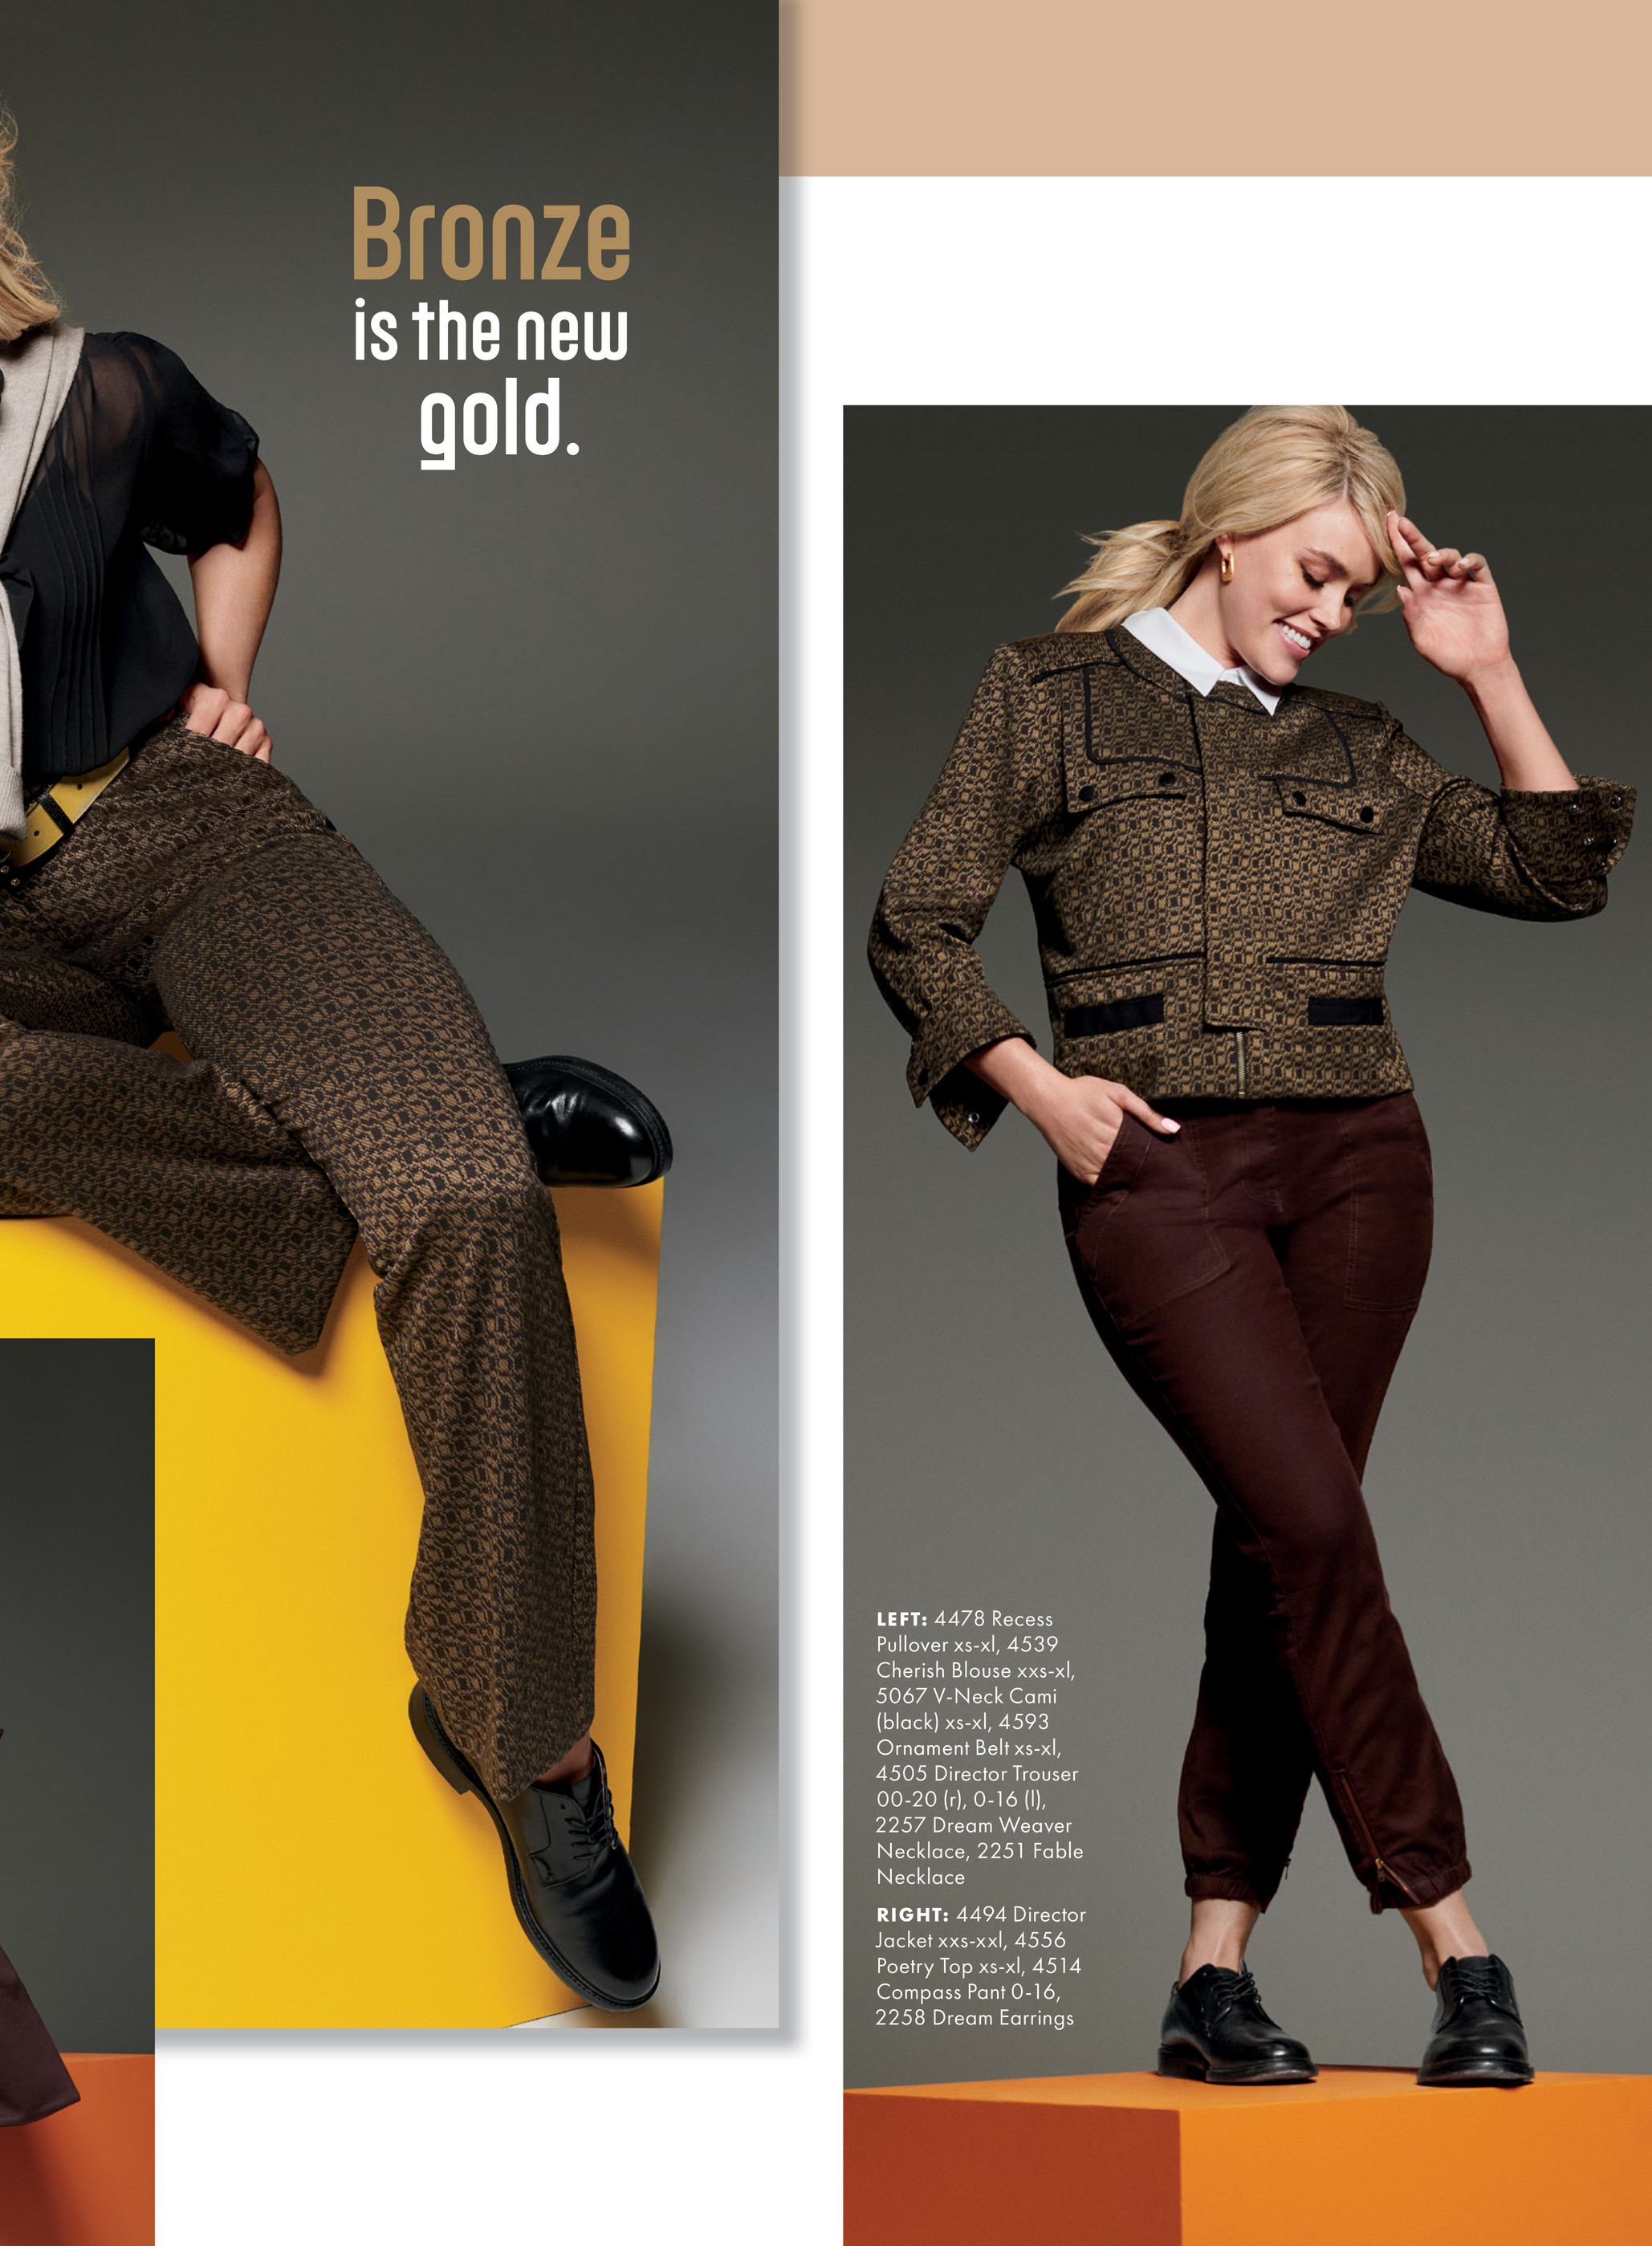 Cabi - Fall 2023 Notion - Page 8-9